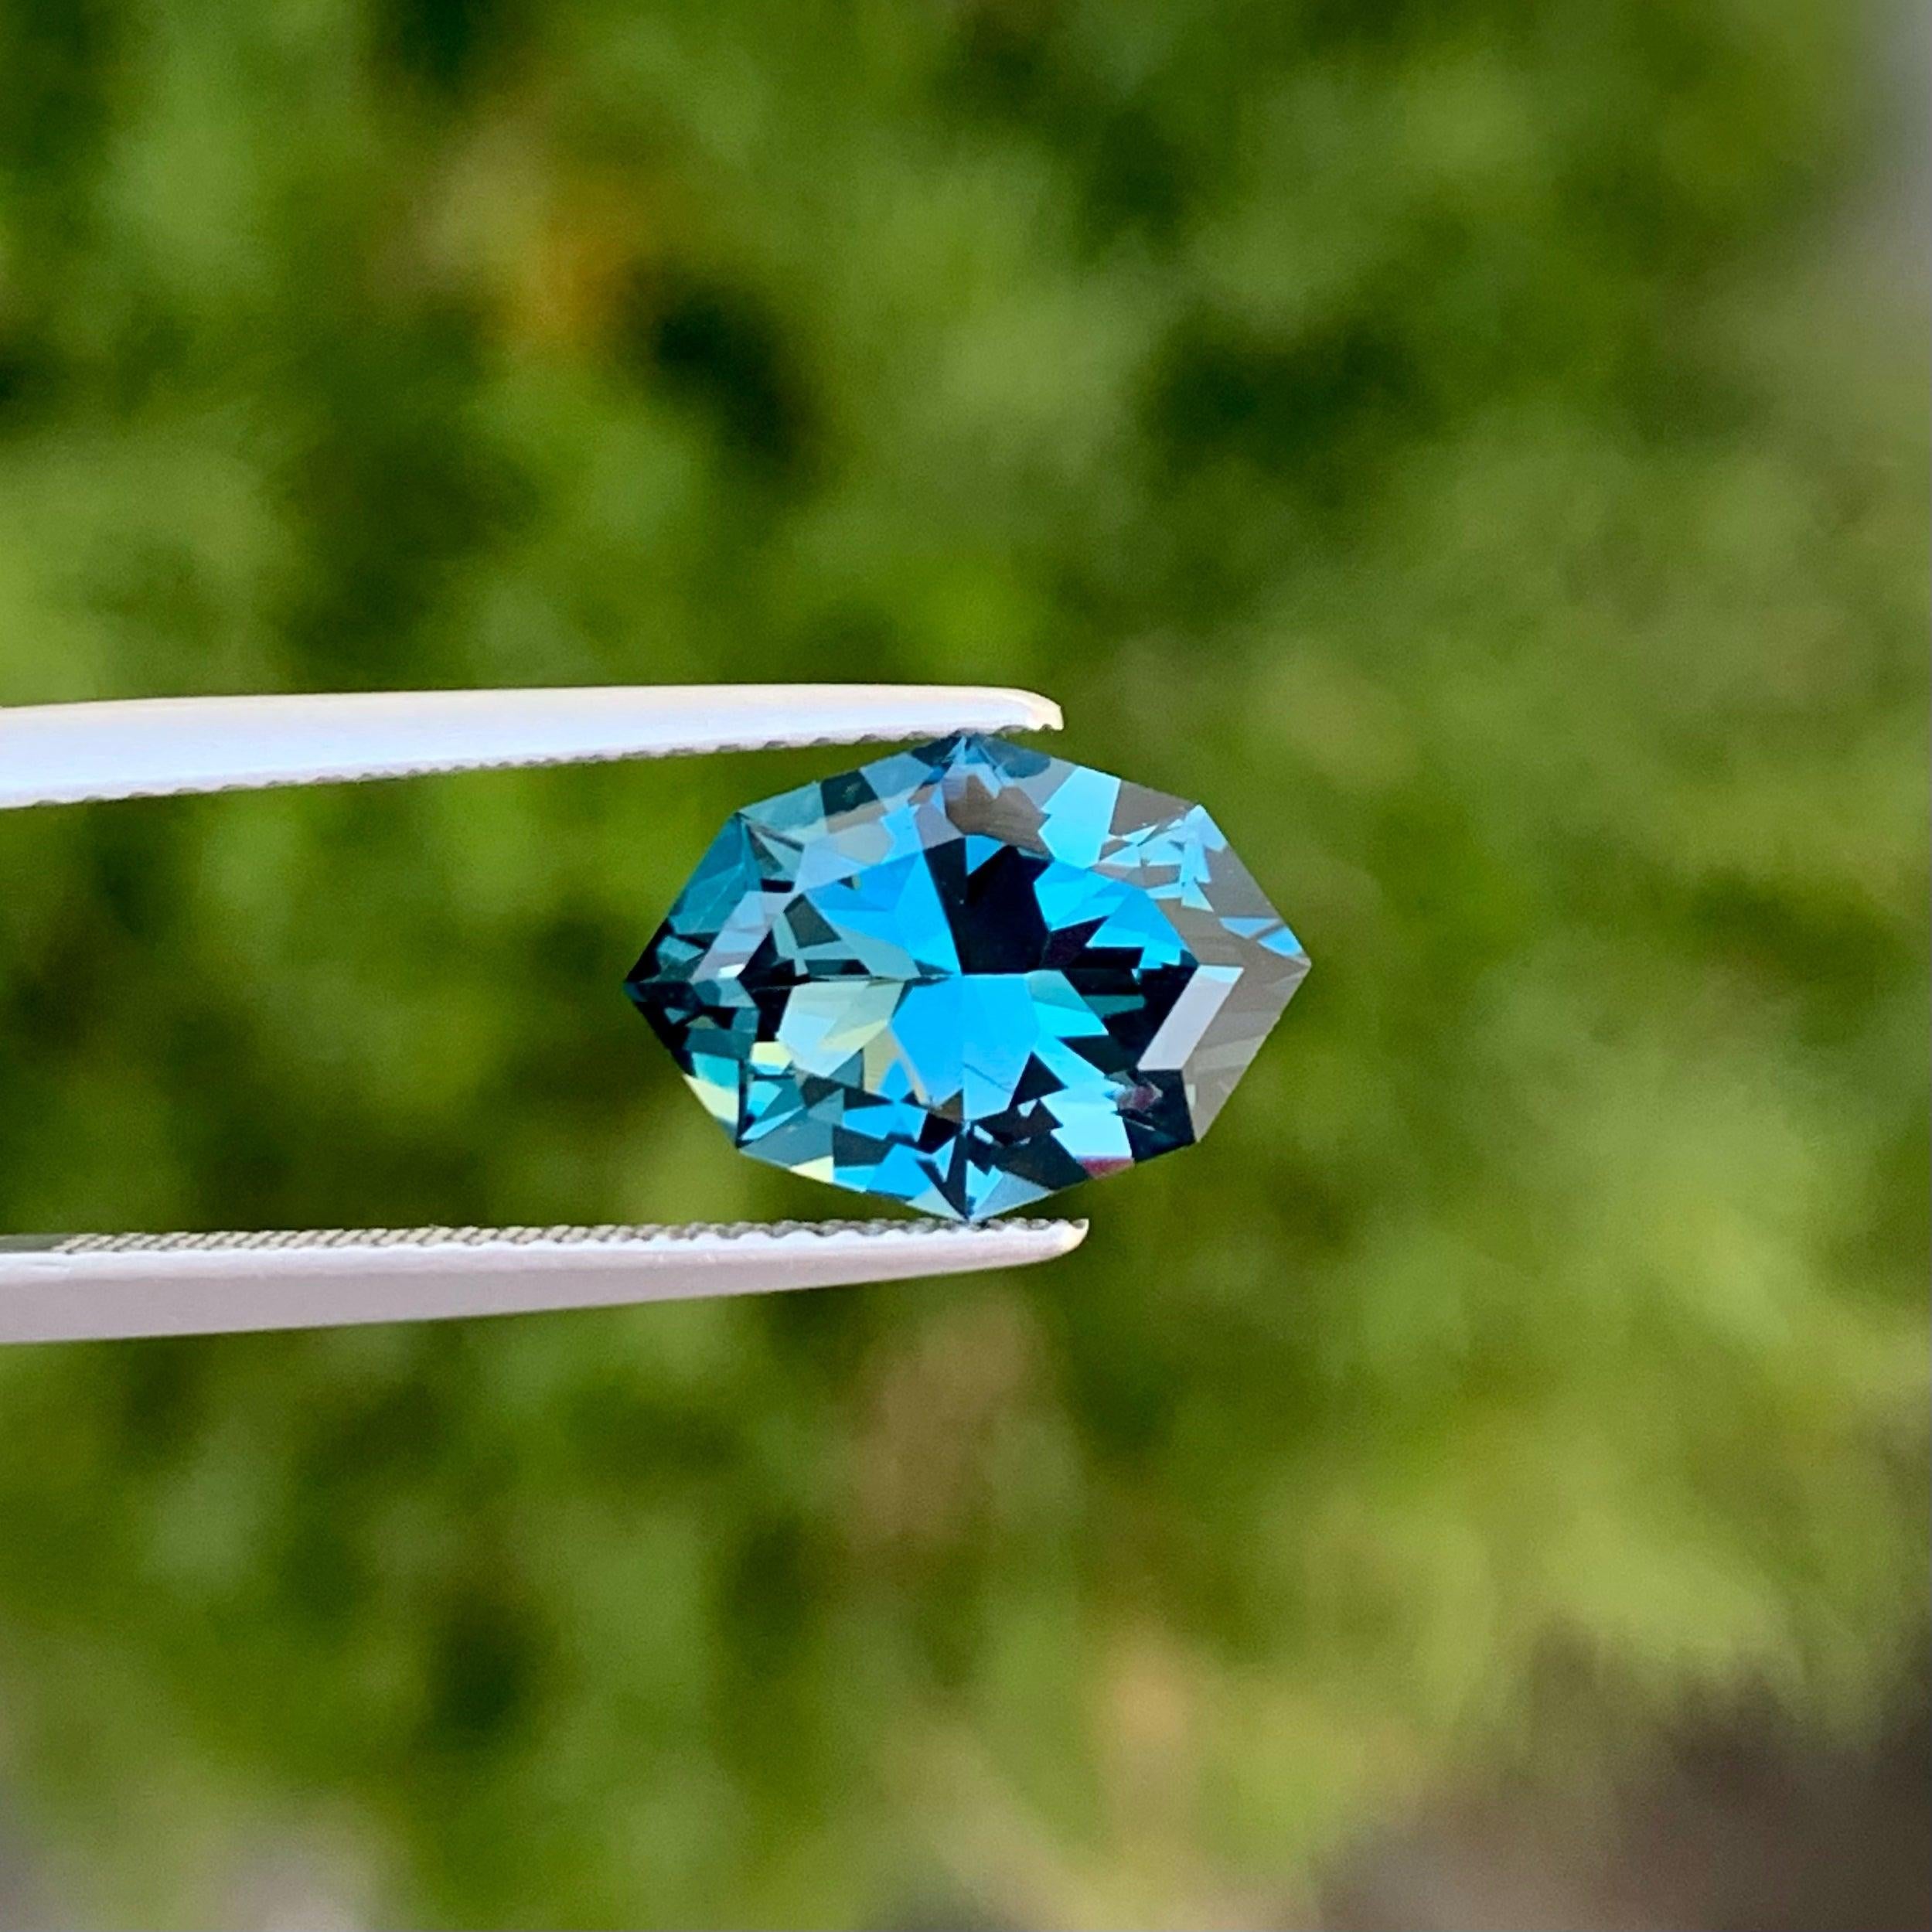 Fancy London Blue Loose Topaz Gemstone, available For Sale At Wholesale Price Natural High Quality 3.70 Carats Loupe Clean Clarity Natural Loose Topaz From Madagascar. 
Product Information:
GEMSTONE NAME:	Fancy London Blue Loose Topaz